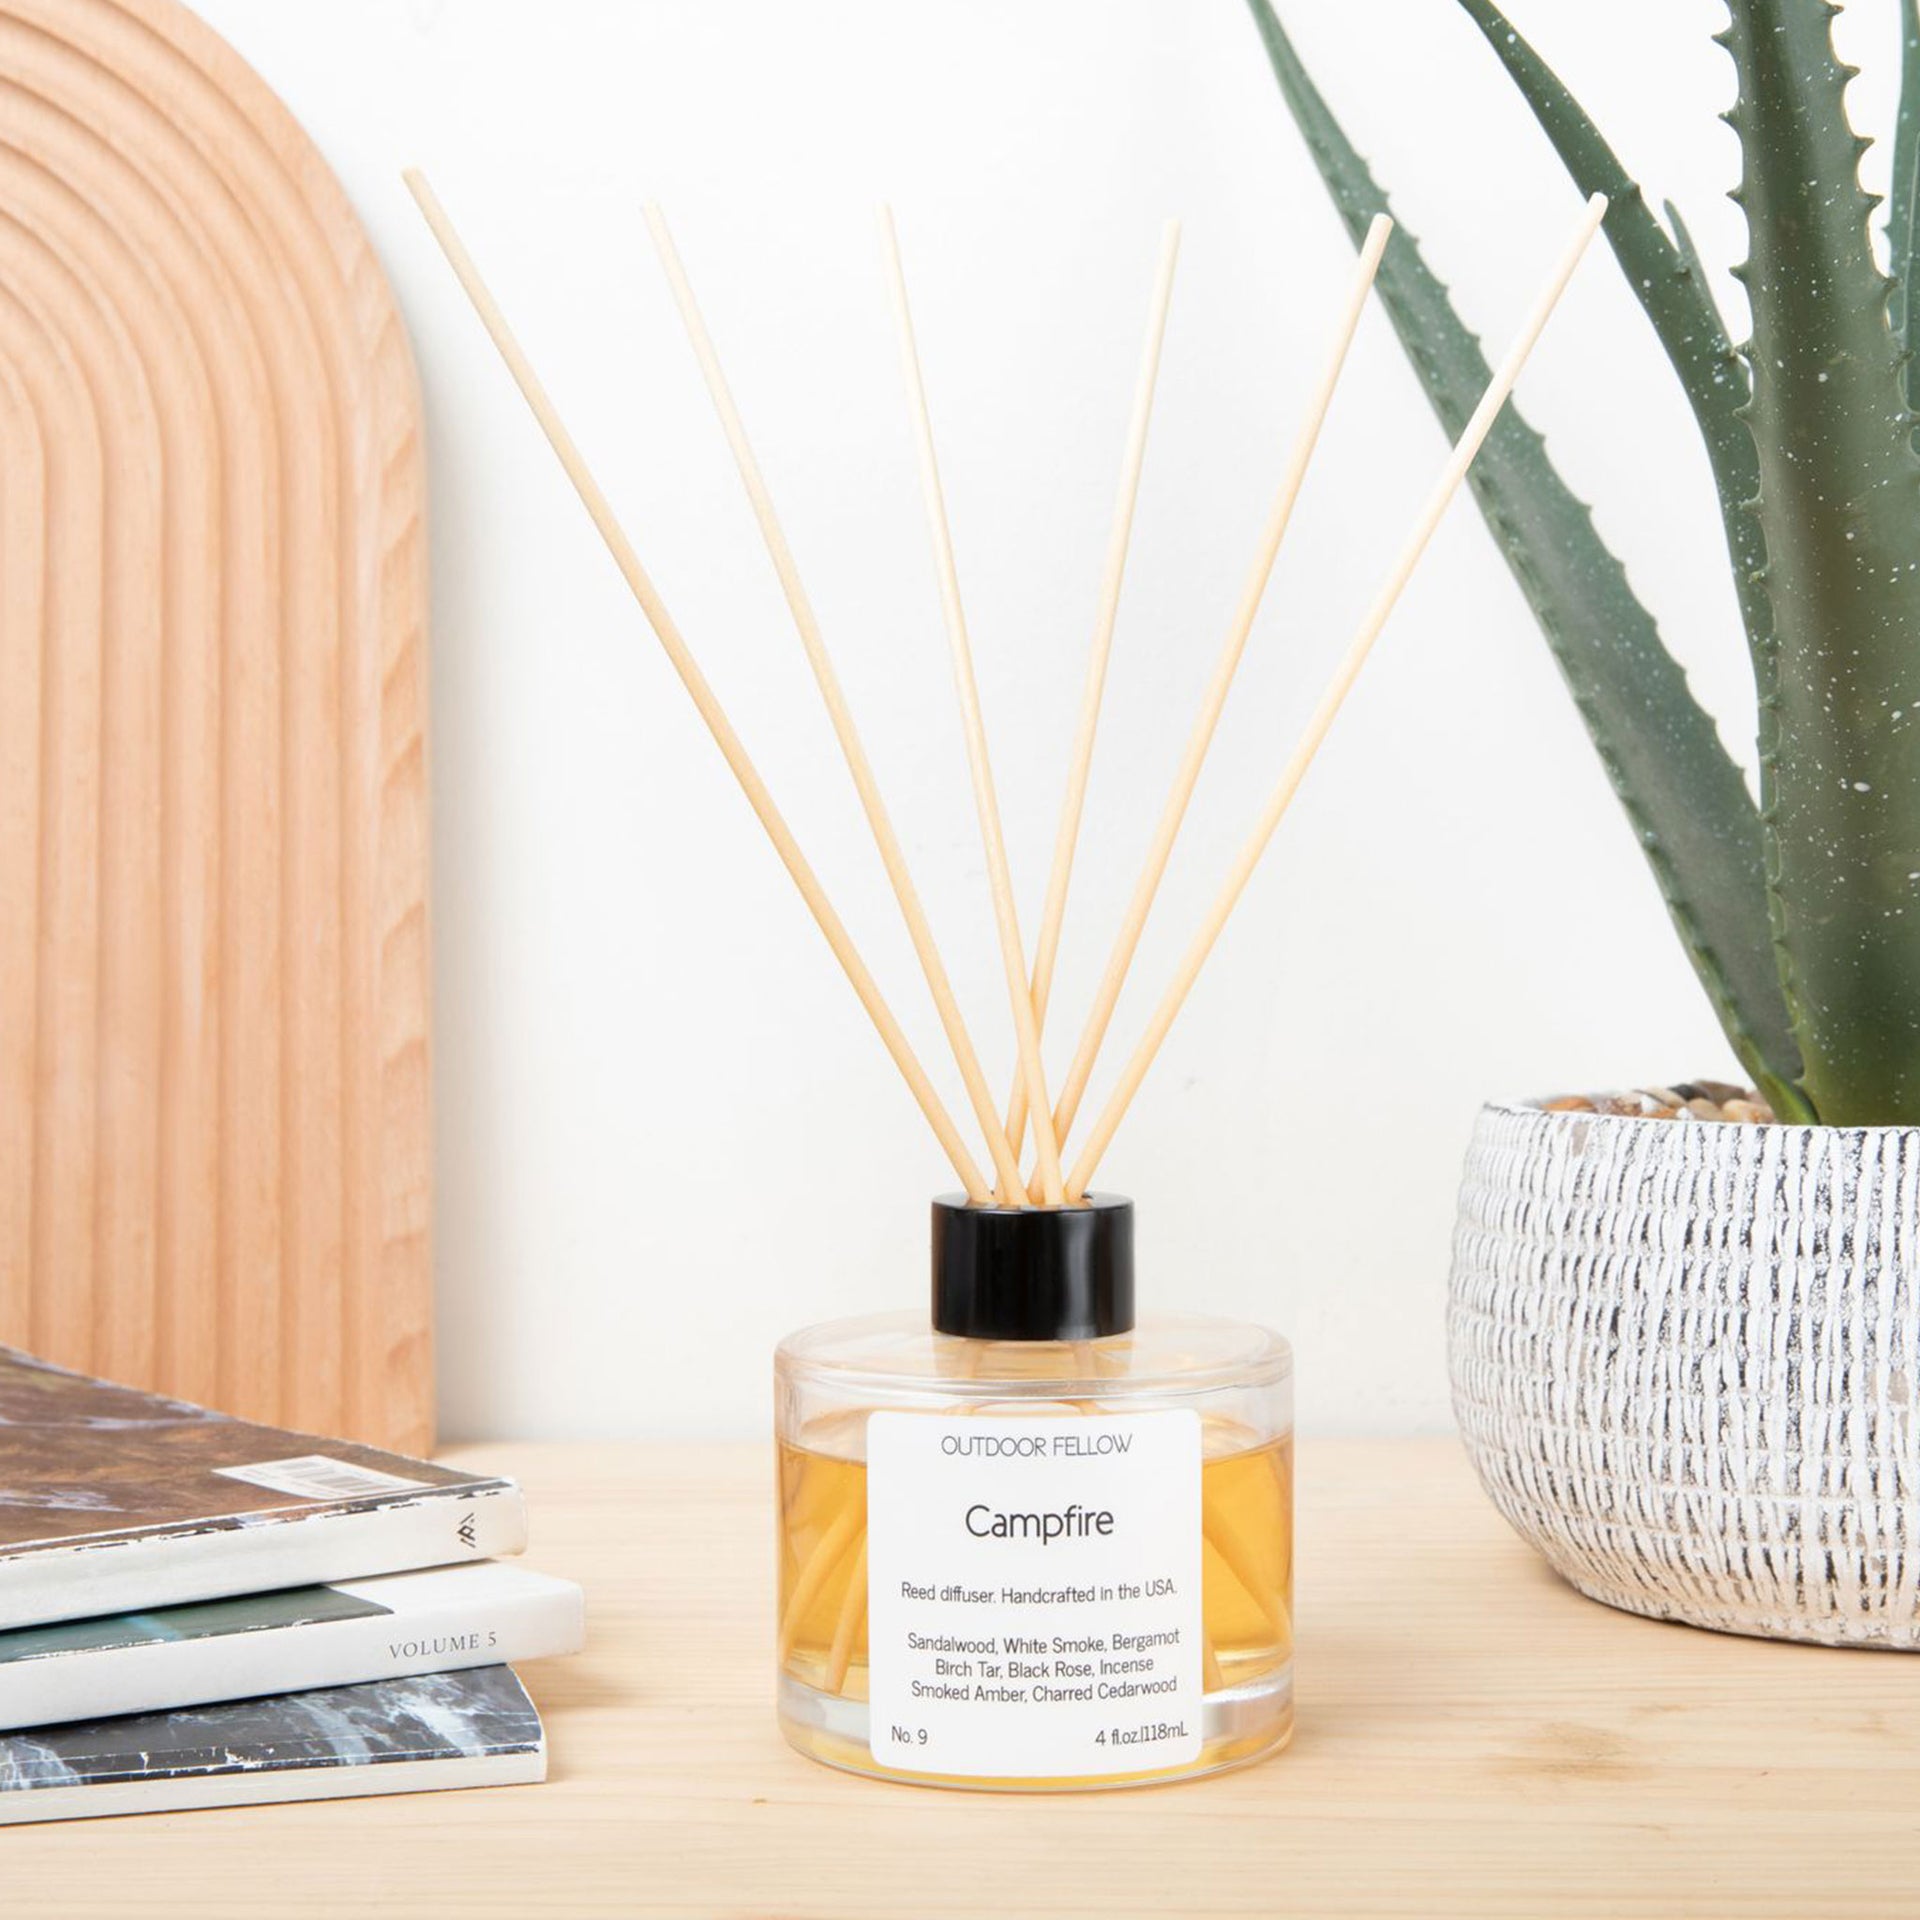 Campfire Reed Diffuser – Outdoor Fellow